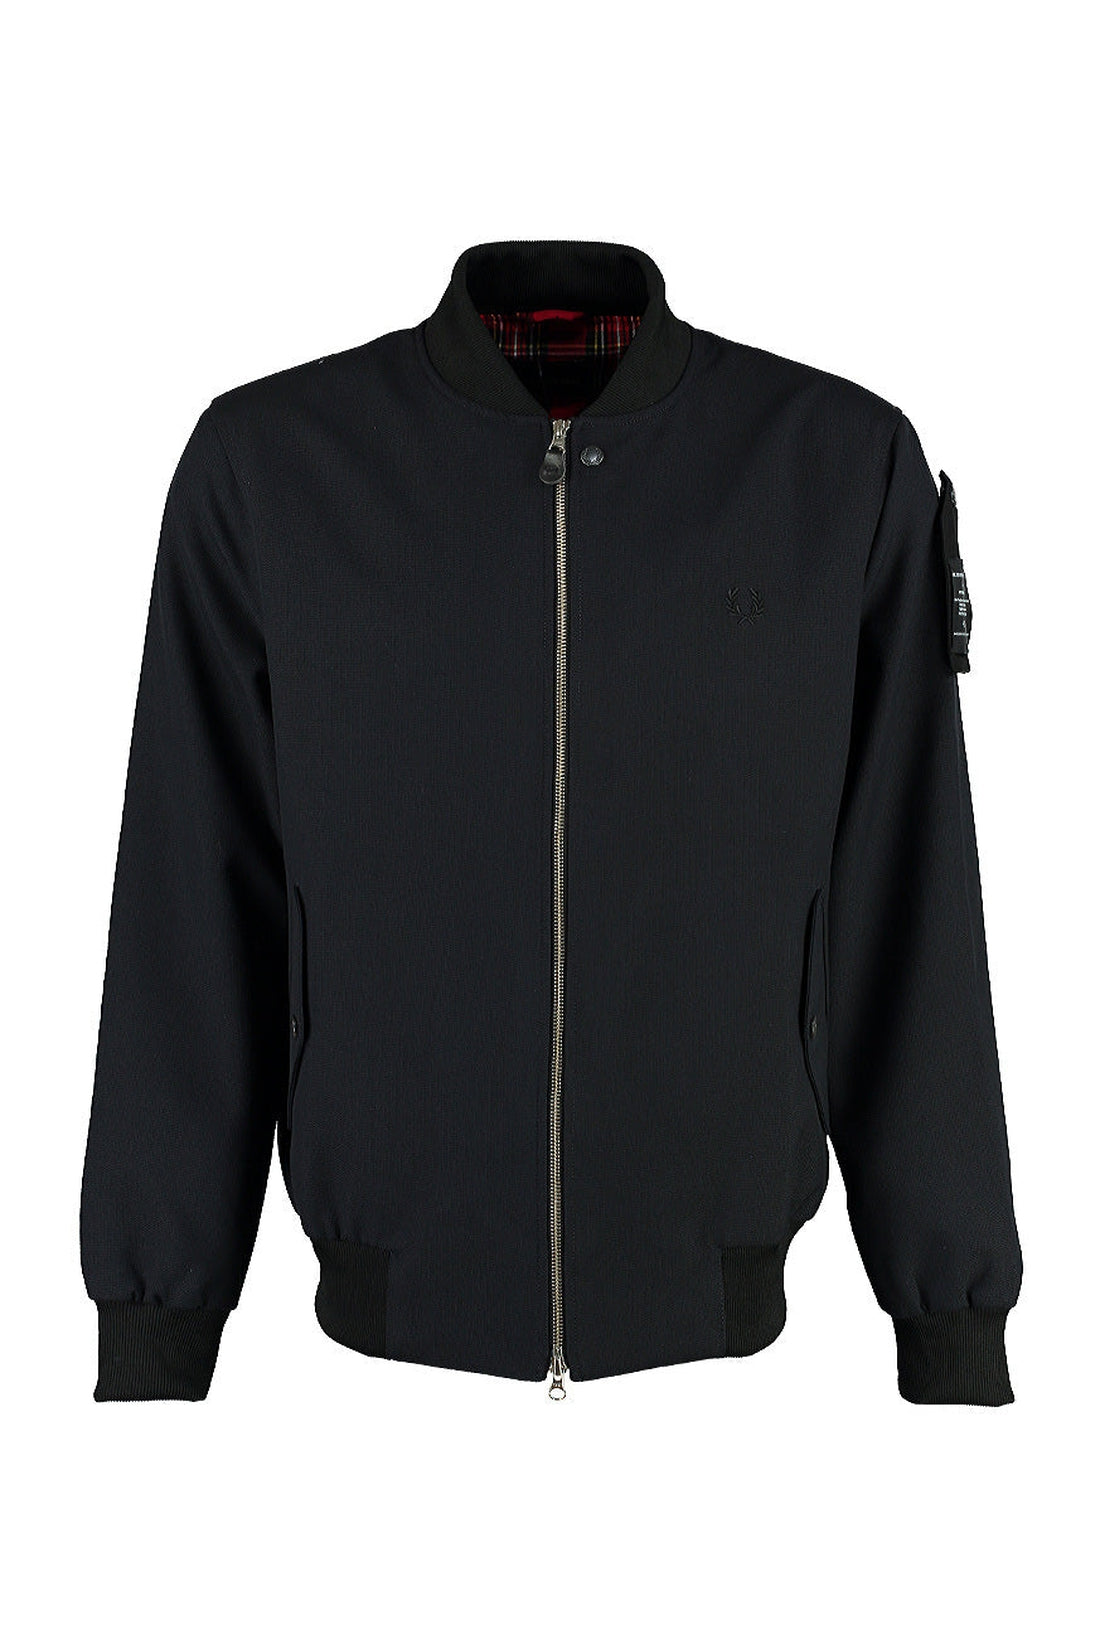 Fred Perry-OUTLET-SALE-'Art Comes First' bomber jacket-ARCHIVIST